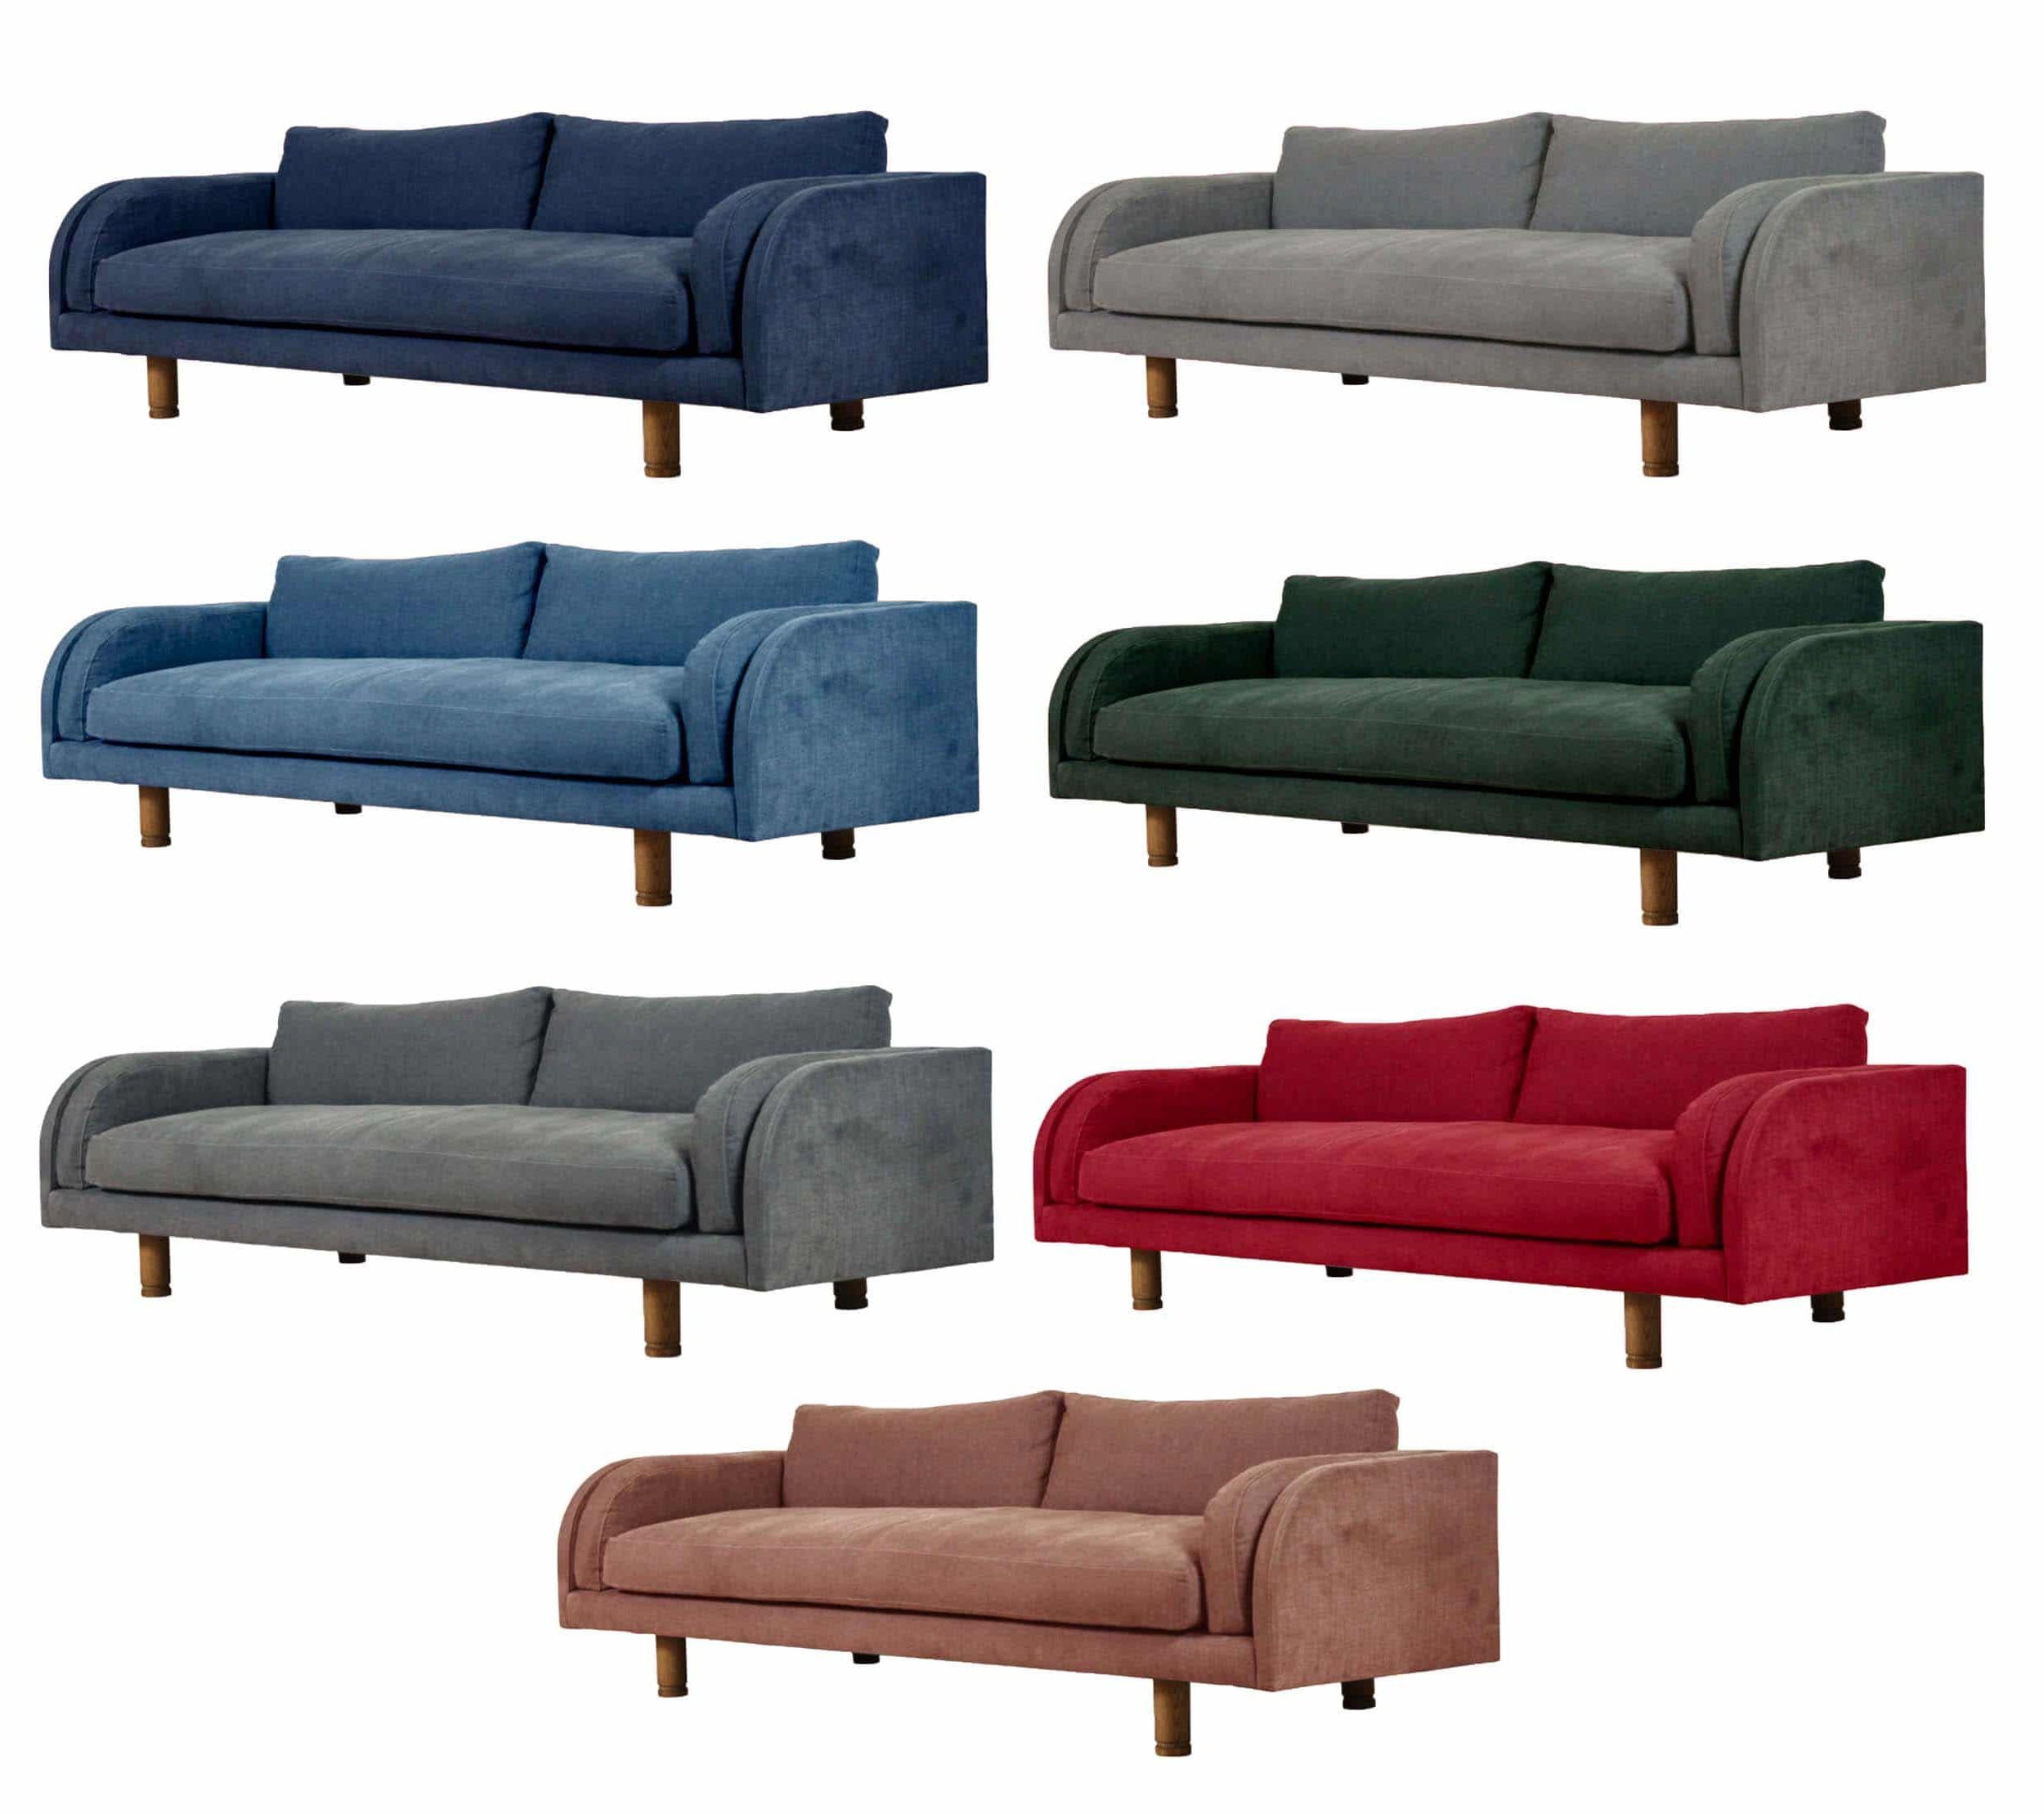 Latest Sofas In Multiple Colors Inside Our Living Room Update: What’s Next? (moodboards + Sofa Debates (View 11 of 15)